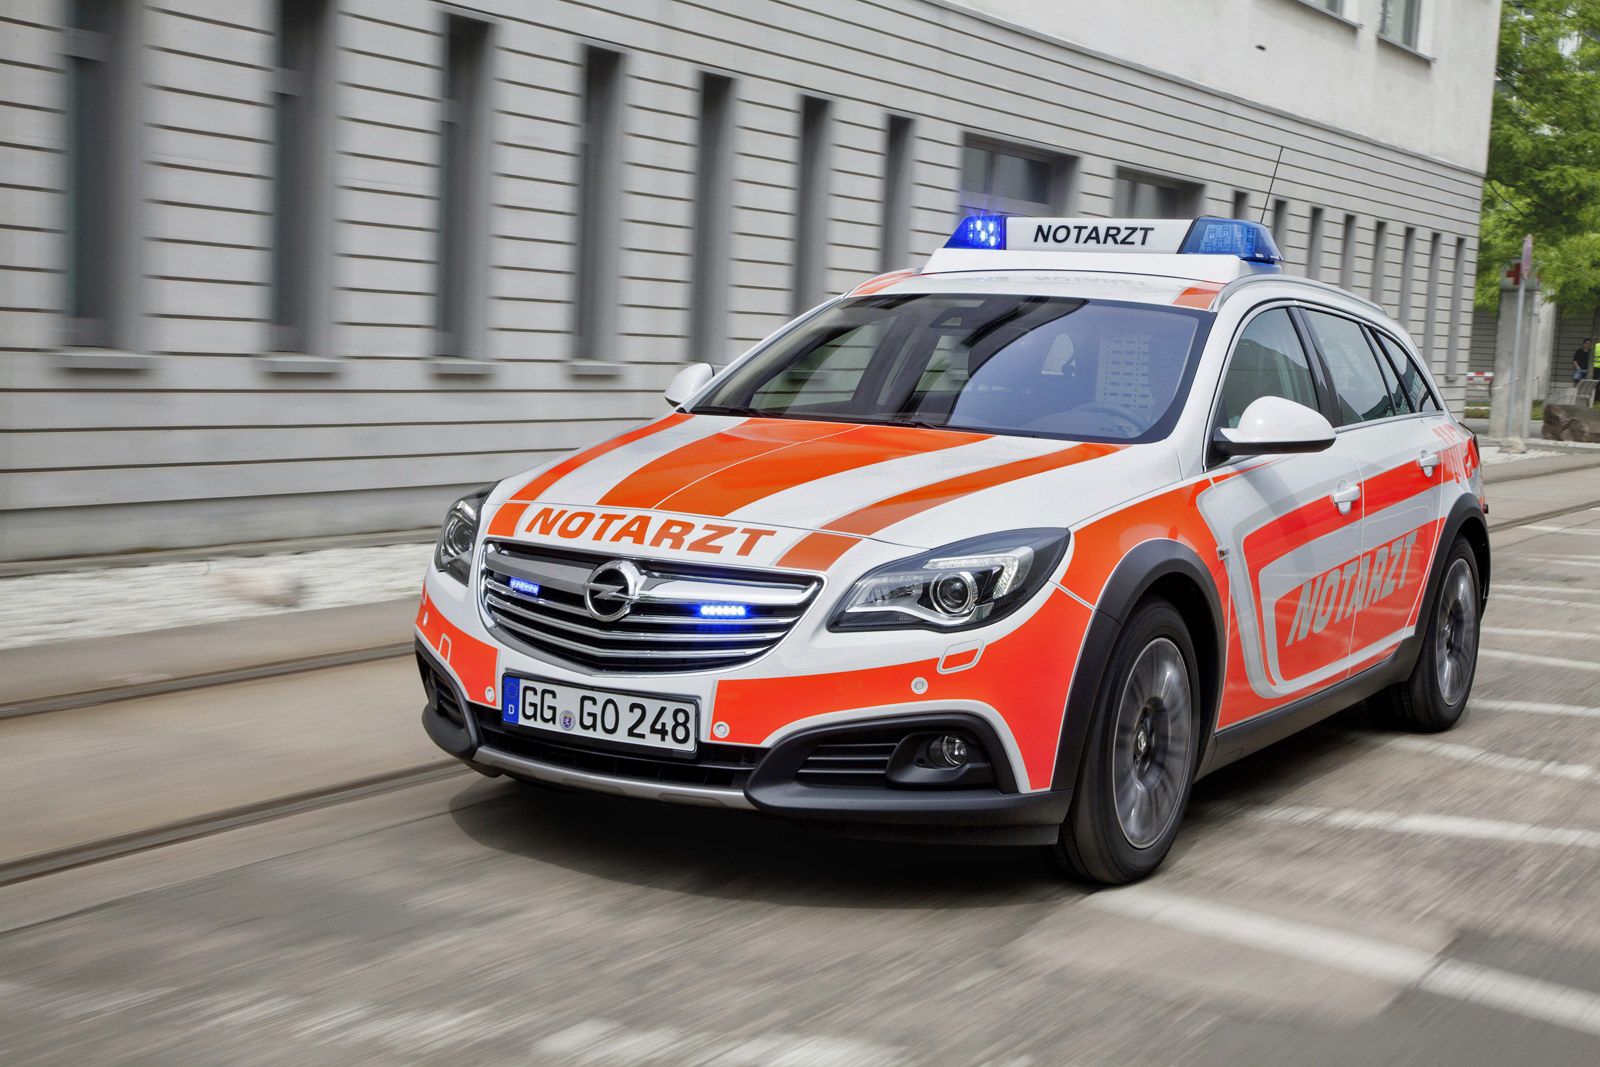 Opel Insignia wagon looks slick in fire-department livery - CNET